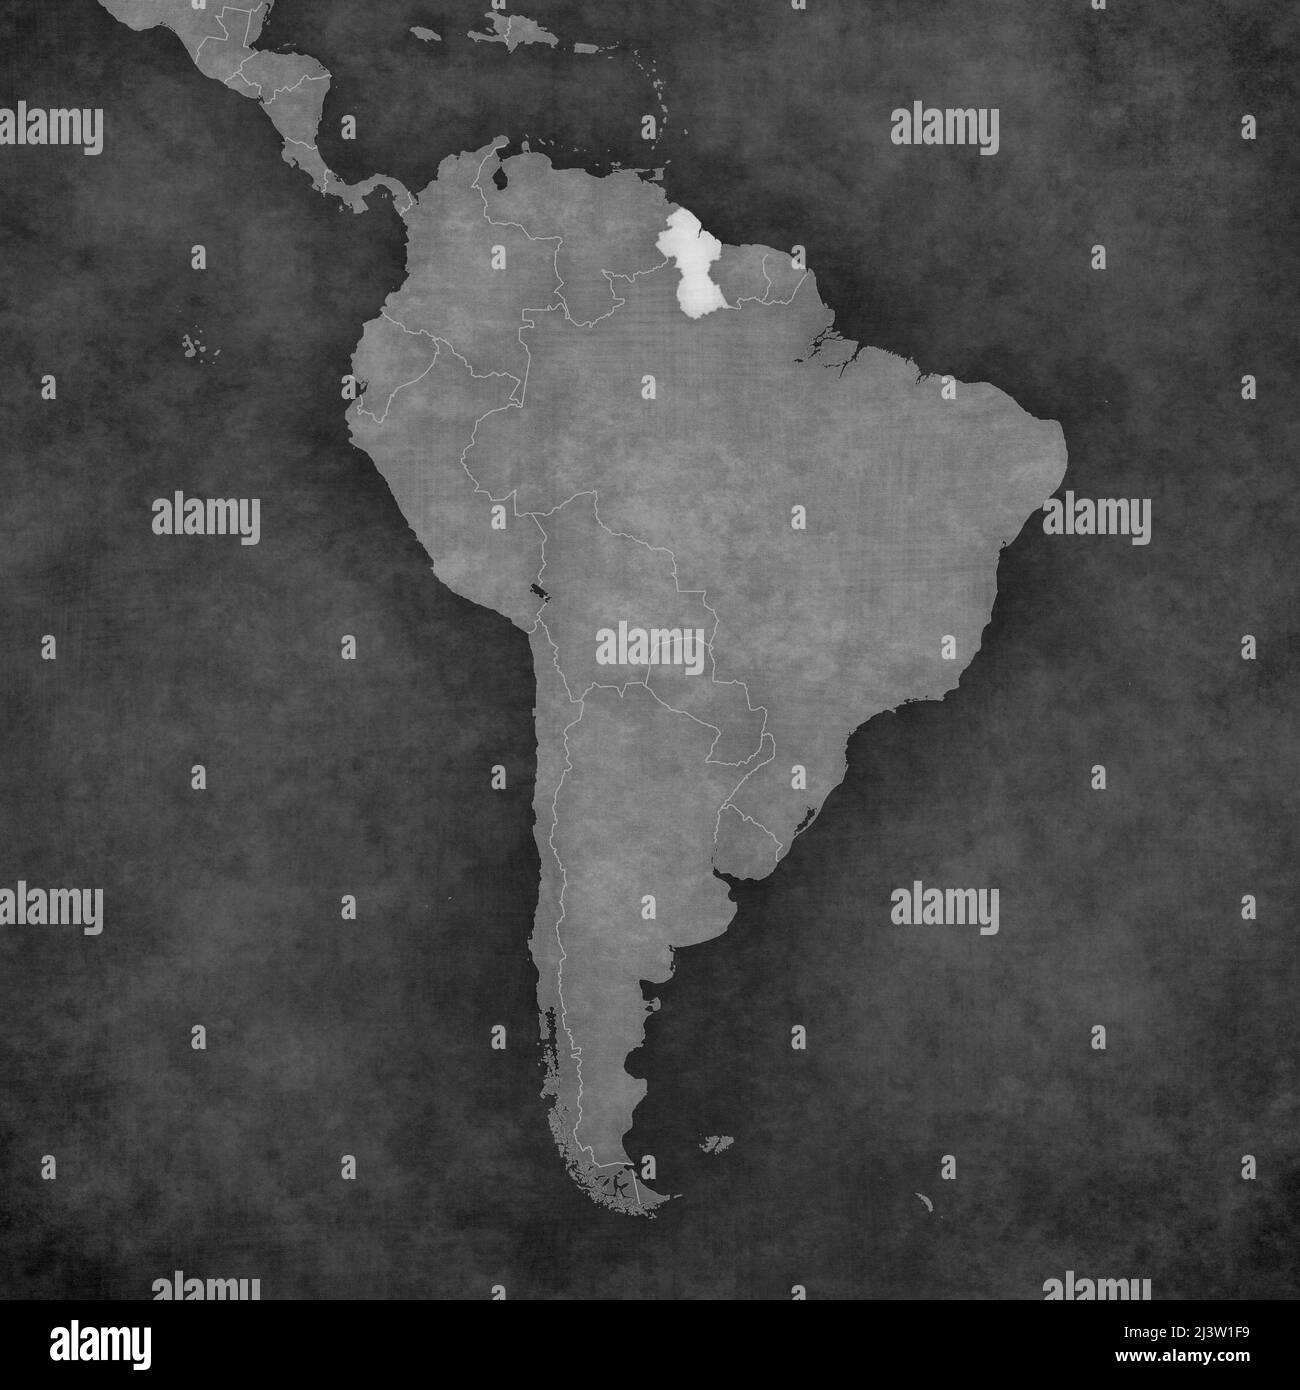 Guyana on the map of South America. The map is in vintage black and white style. The map has soft grunge and retro old paper atmosphere. Stock Photo